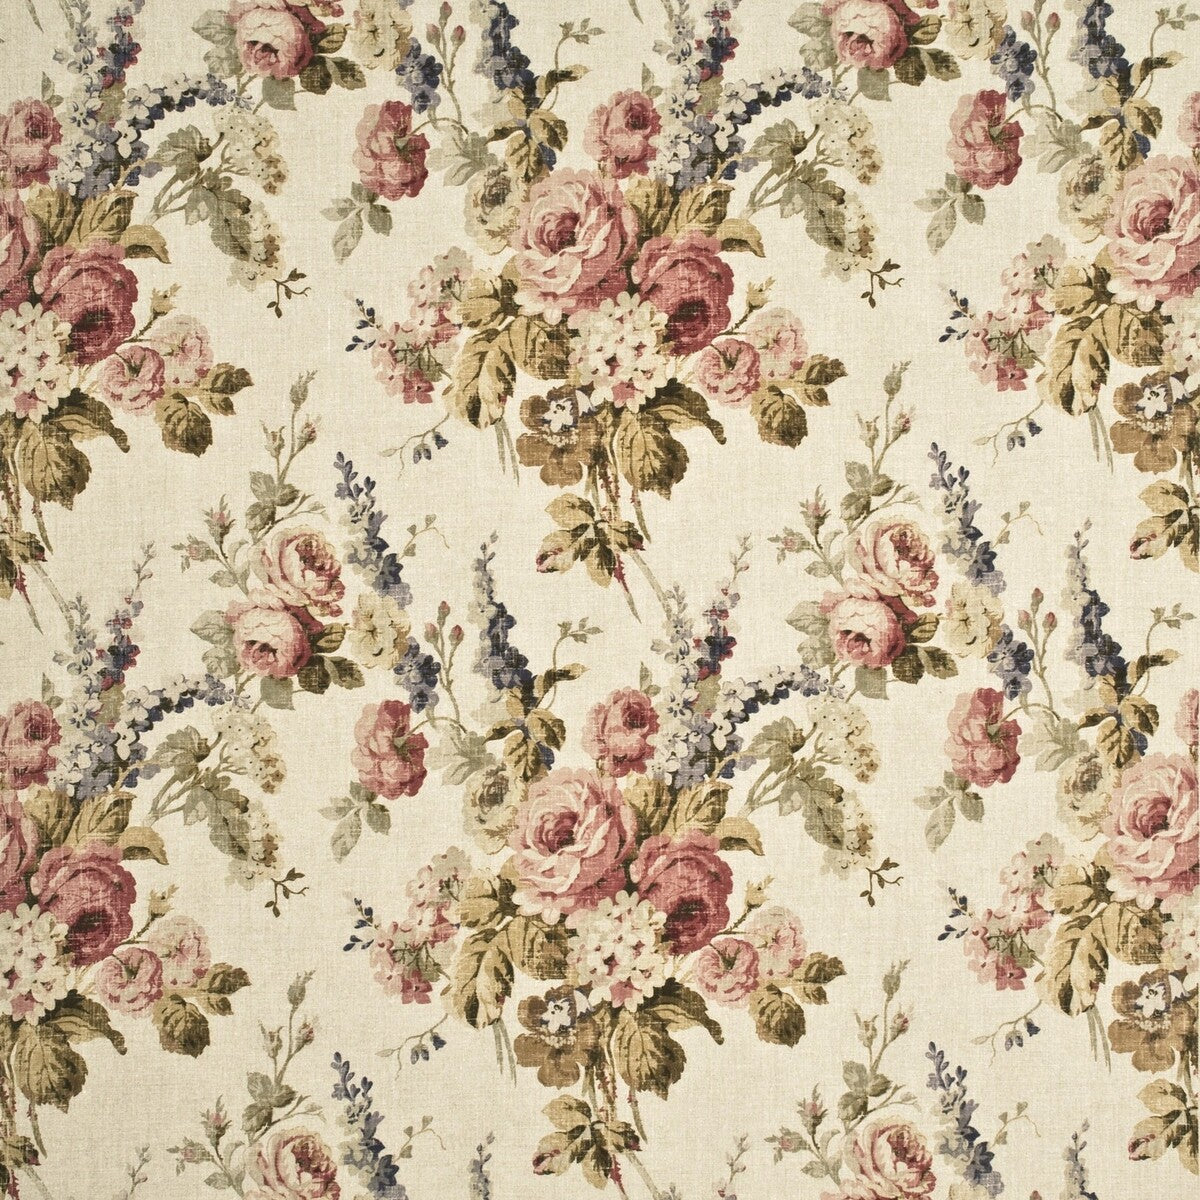 Vintage Floral fabric in antique/rose color - pattern FD264.J143.0 - by Mulberry in the Country Weekend collection